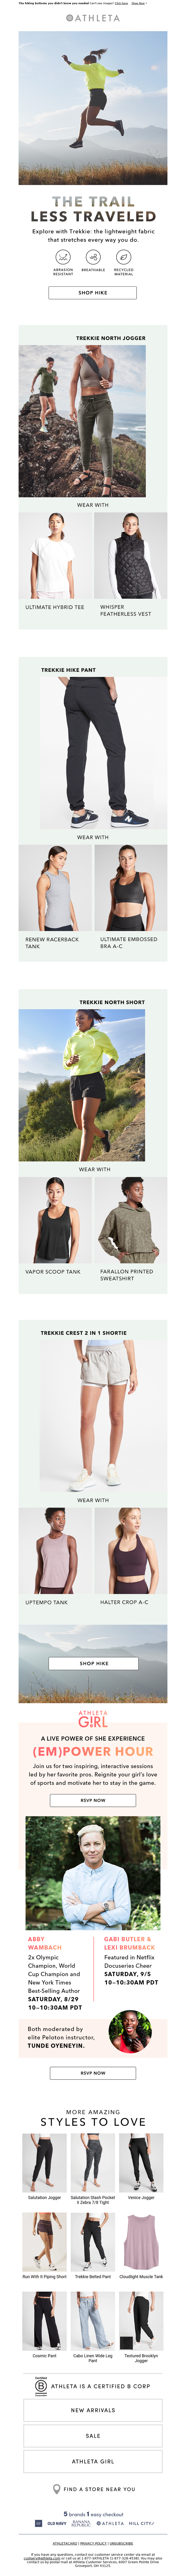 Athleta - Now Presenting: You'll Adore These Trail-Ready Styles